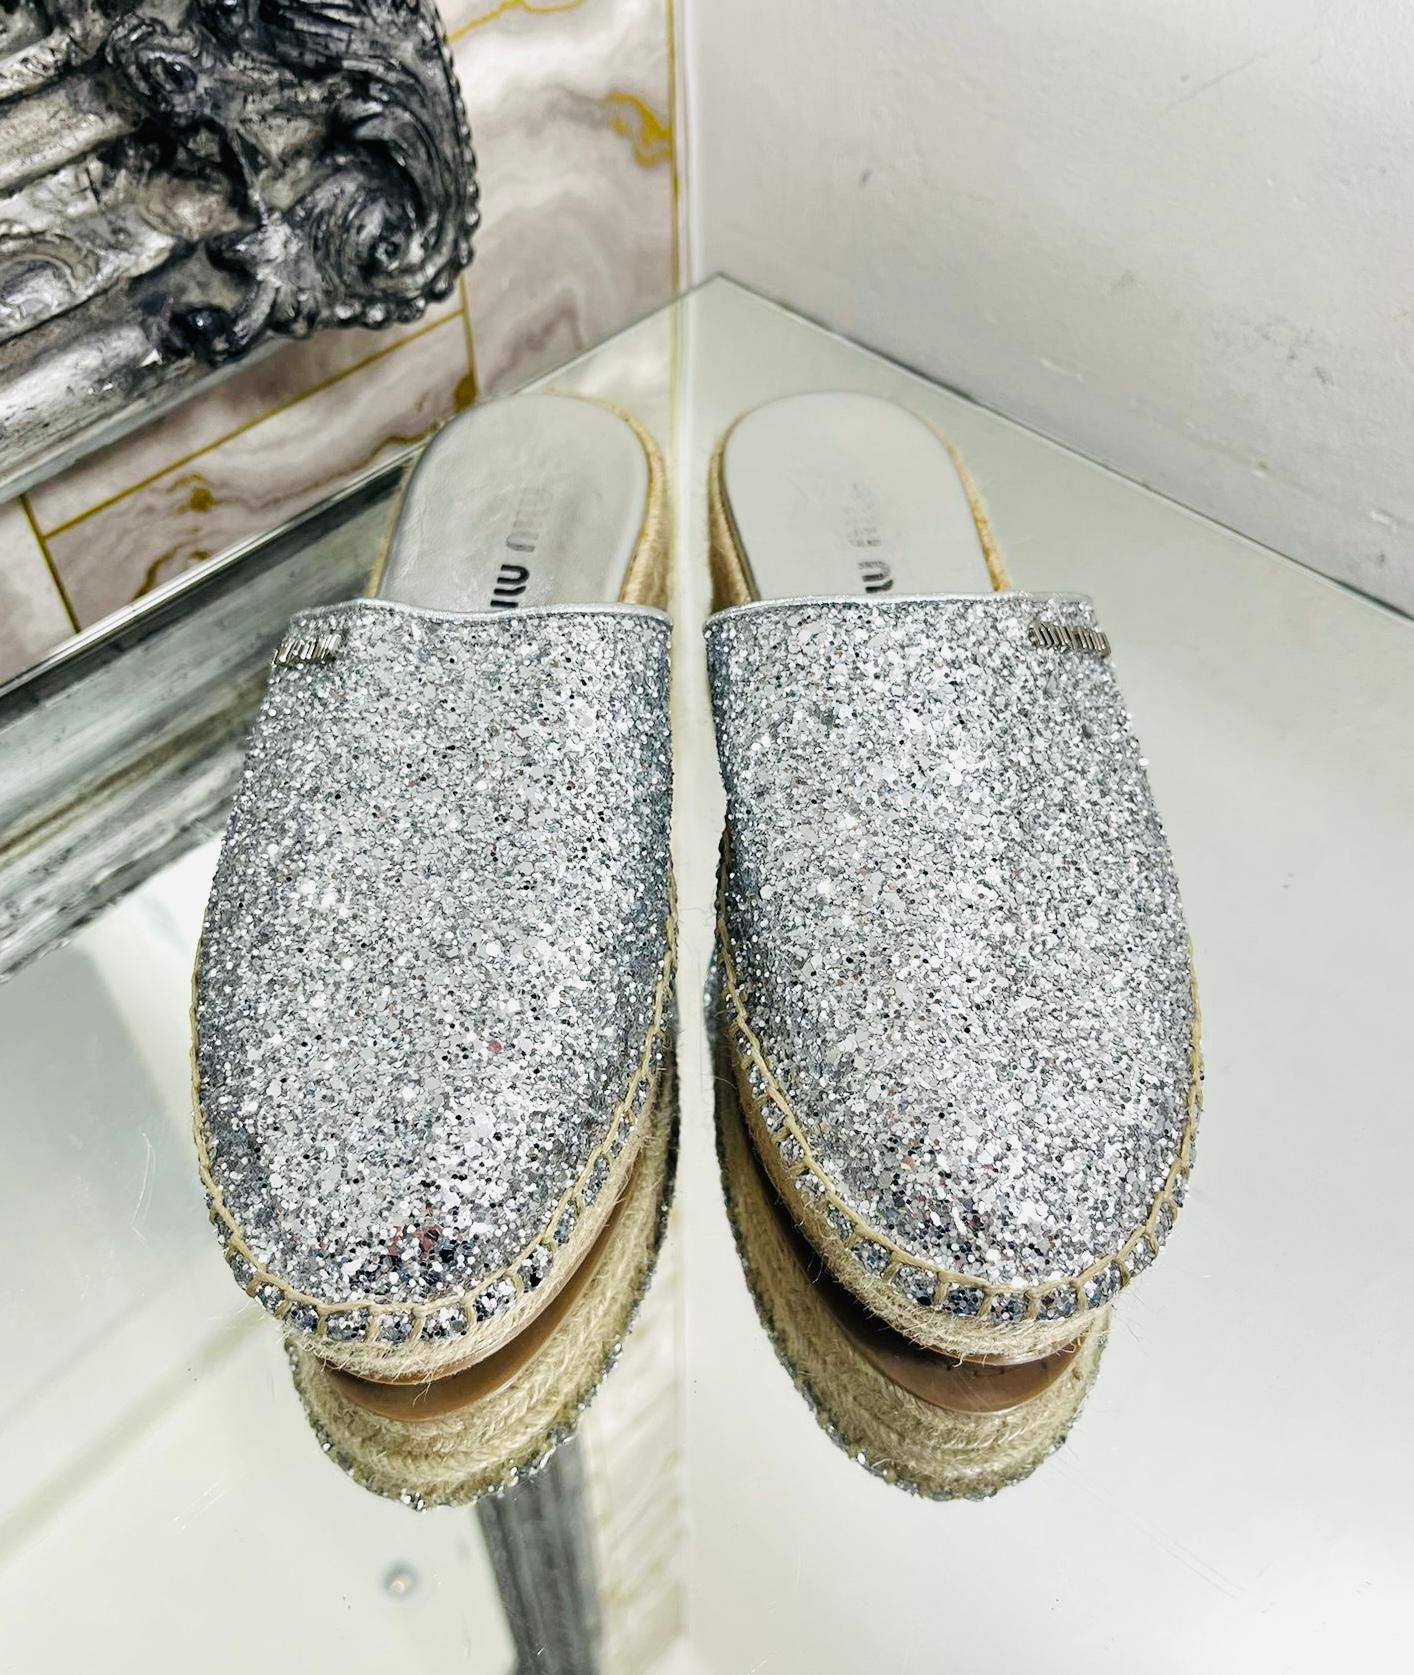 Miu Miu Glitter & Leather Logo Espadrilles

Silver slip-on espadrilles designed with designed with braided raffia midsoles.

Detailed with silver 'Miu Miu' lettering to the side, featuring round toe and rubber soles. Rrp £420

Size – 38.5

Condition